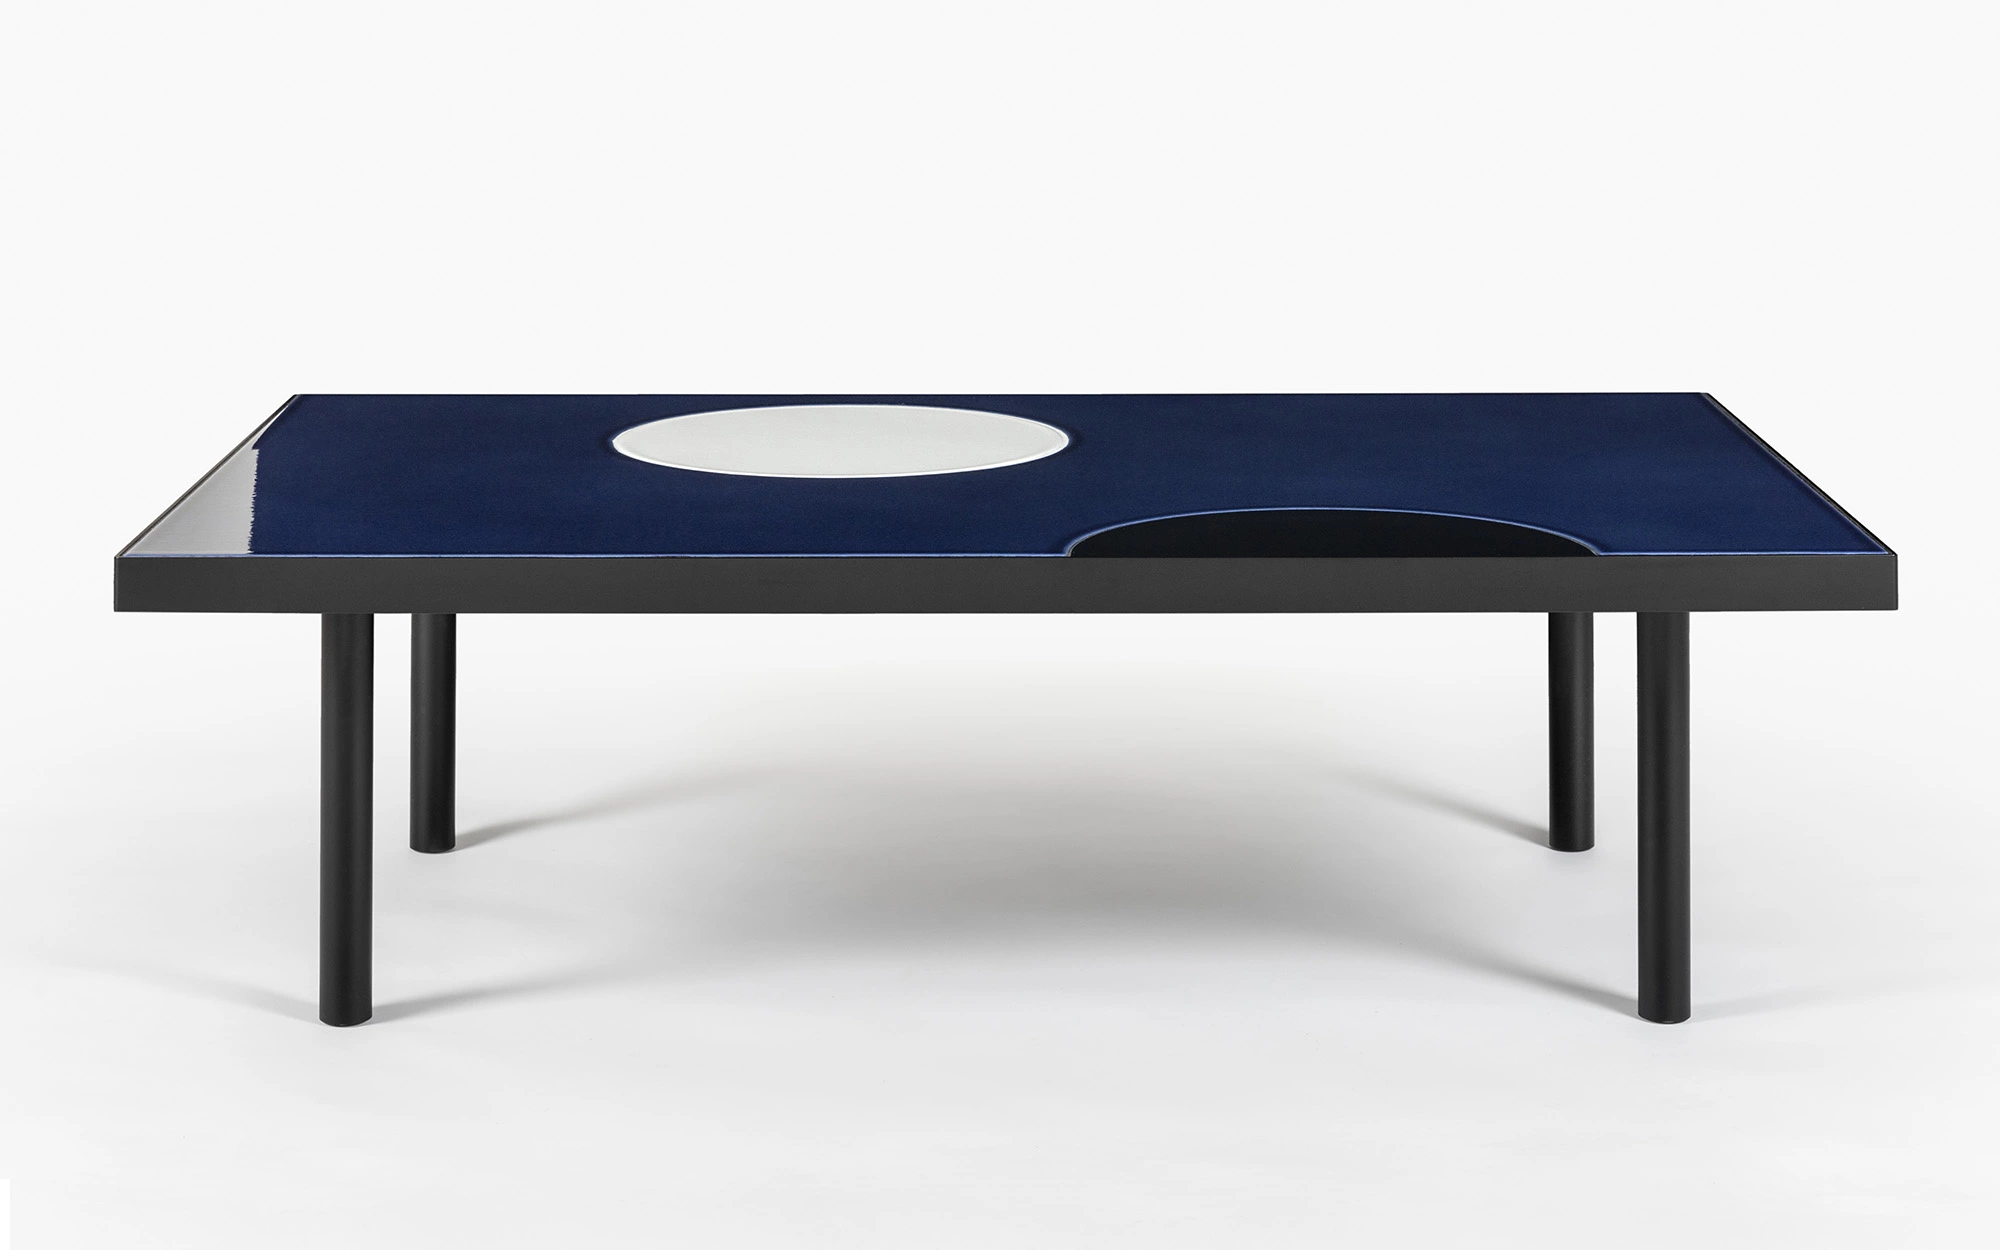 Translation Discolo Coffee Table - Pierre Charpin - Art and Drawing - Galerie kreo